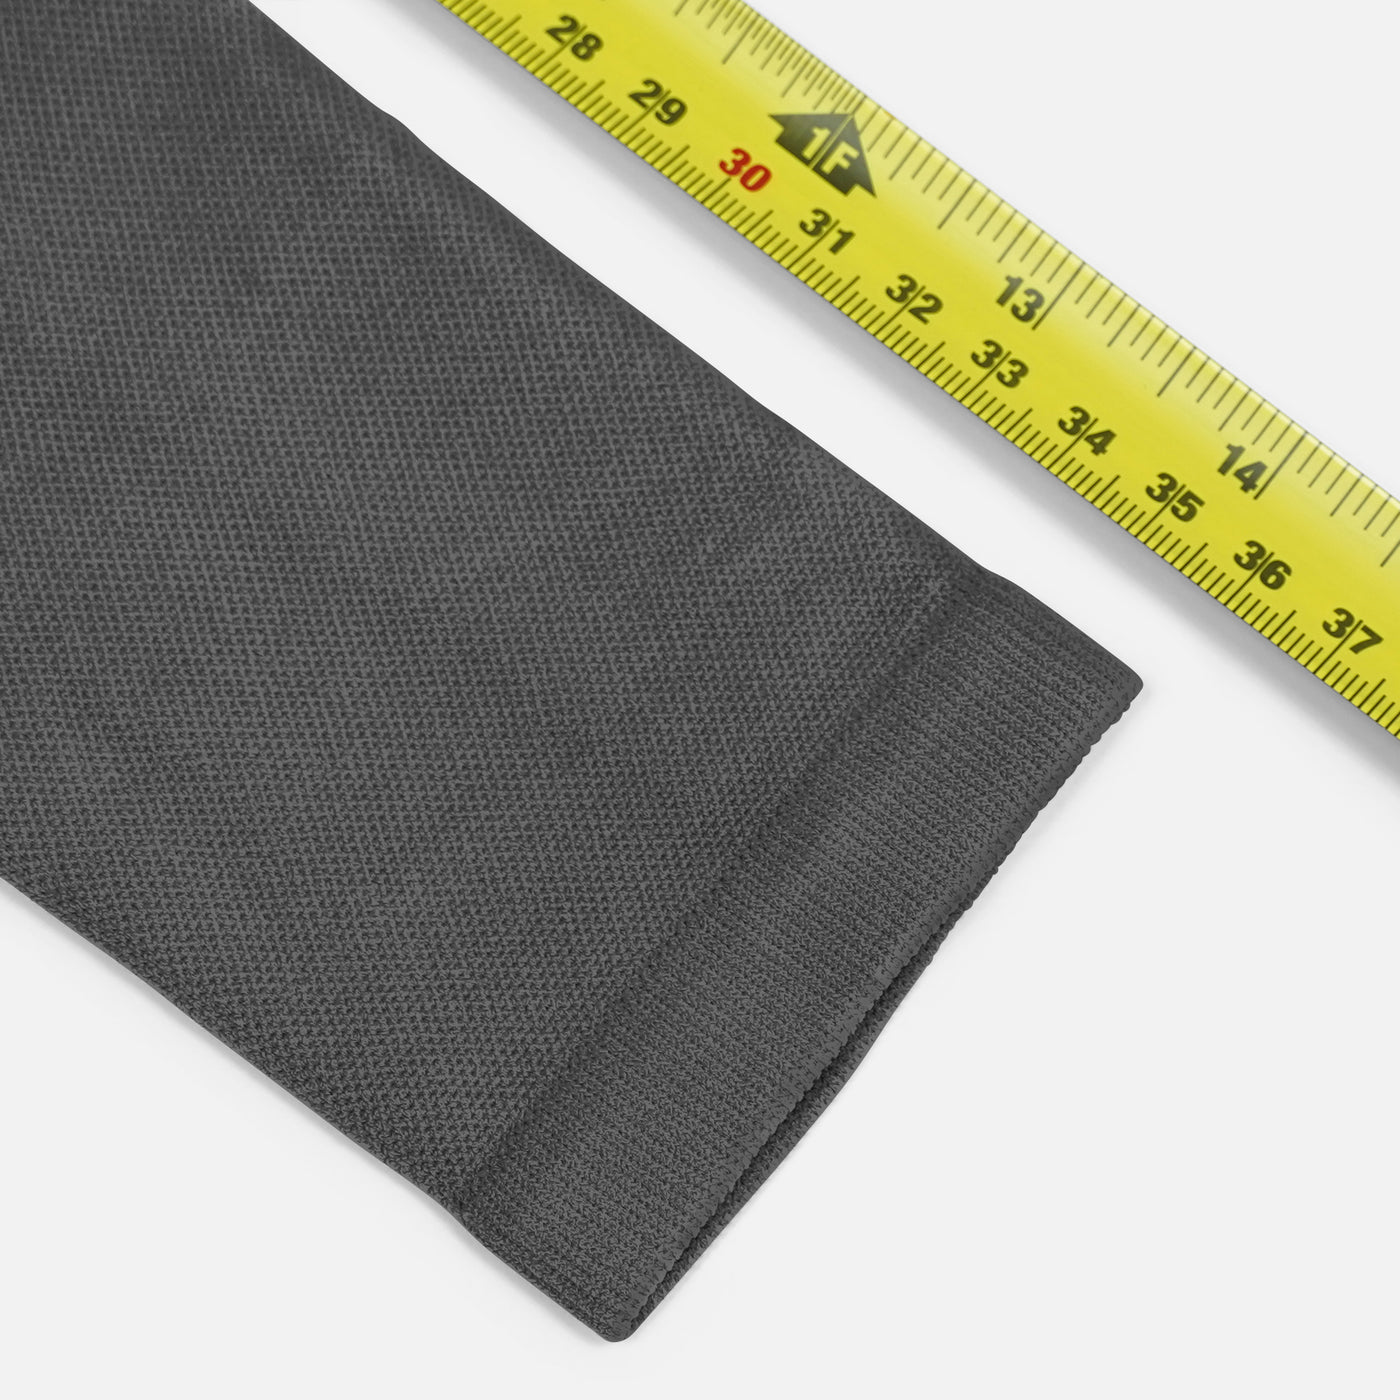 Hue Dark Gray One Size Fits All Arm Sleeve